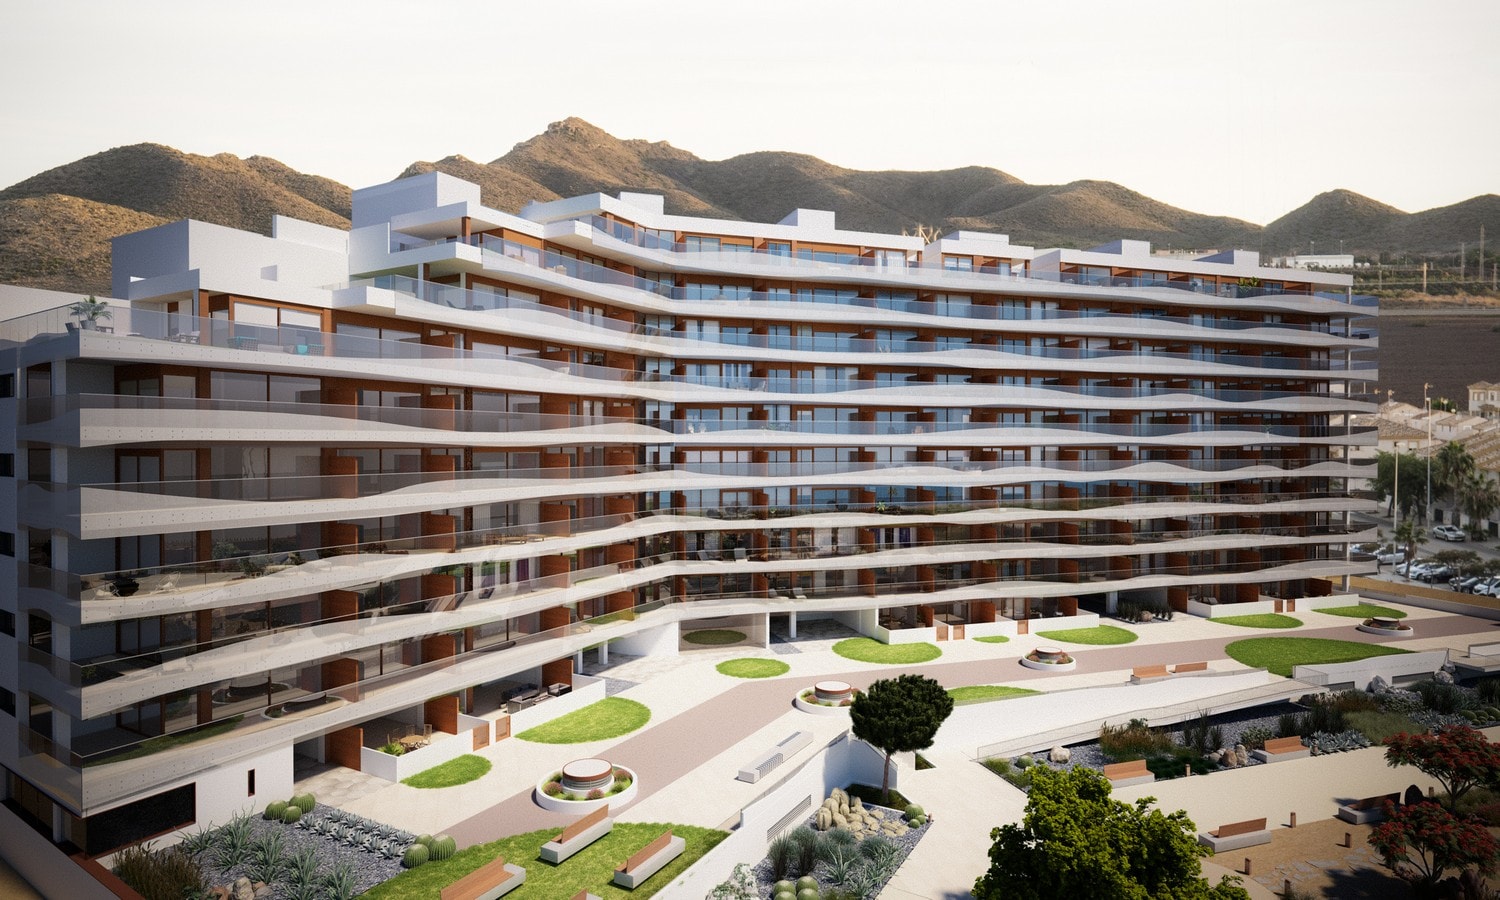 2/3-Bed Luxury Waterfront Apartments and Penthouses in La Manga